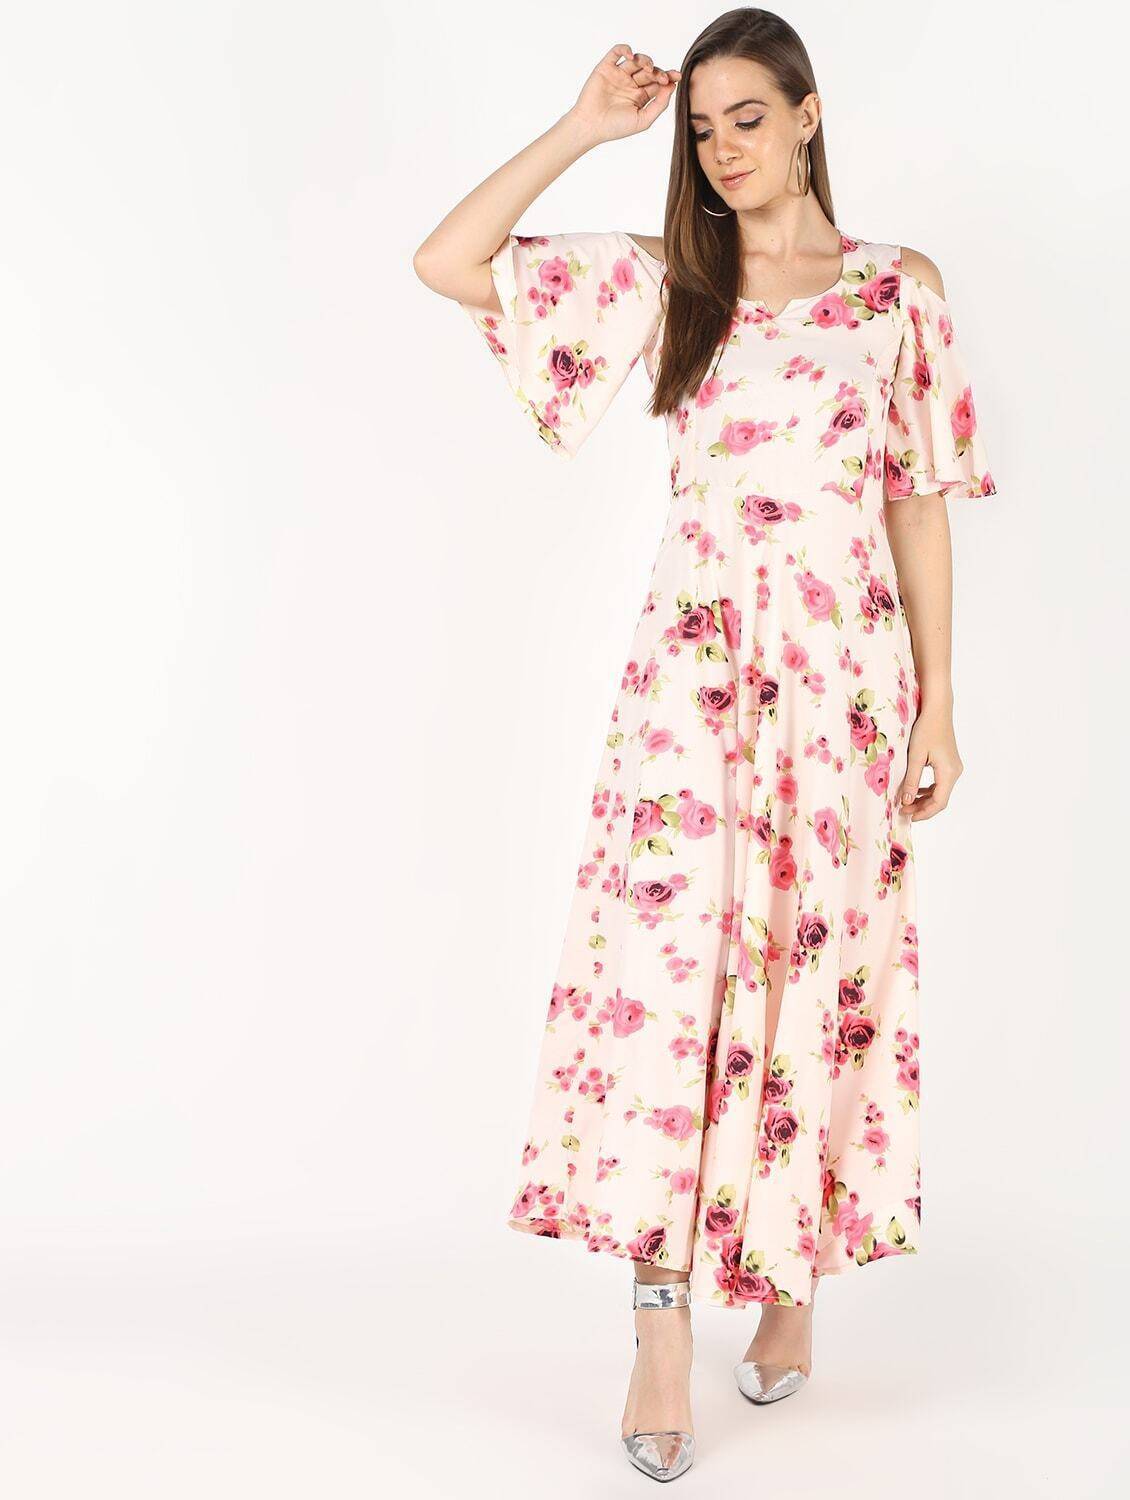 Women's Cream Front Princess Cut With Bell Sleeve Floral Print Long Dress - Cheera